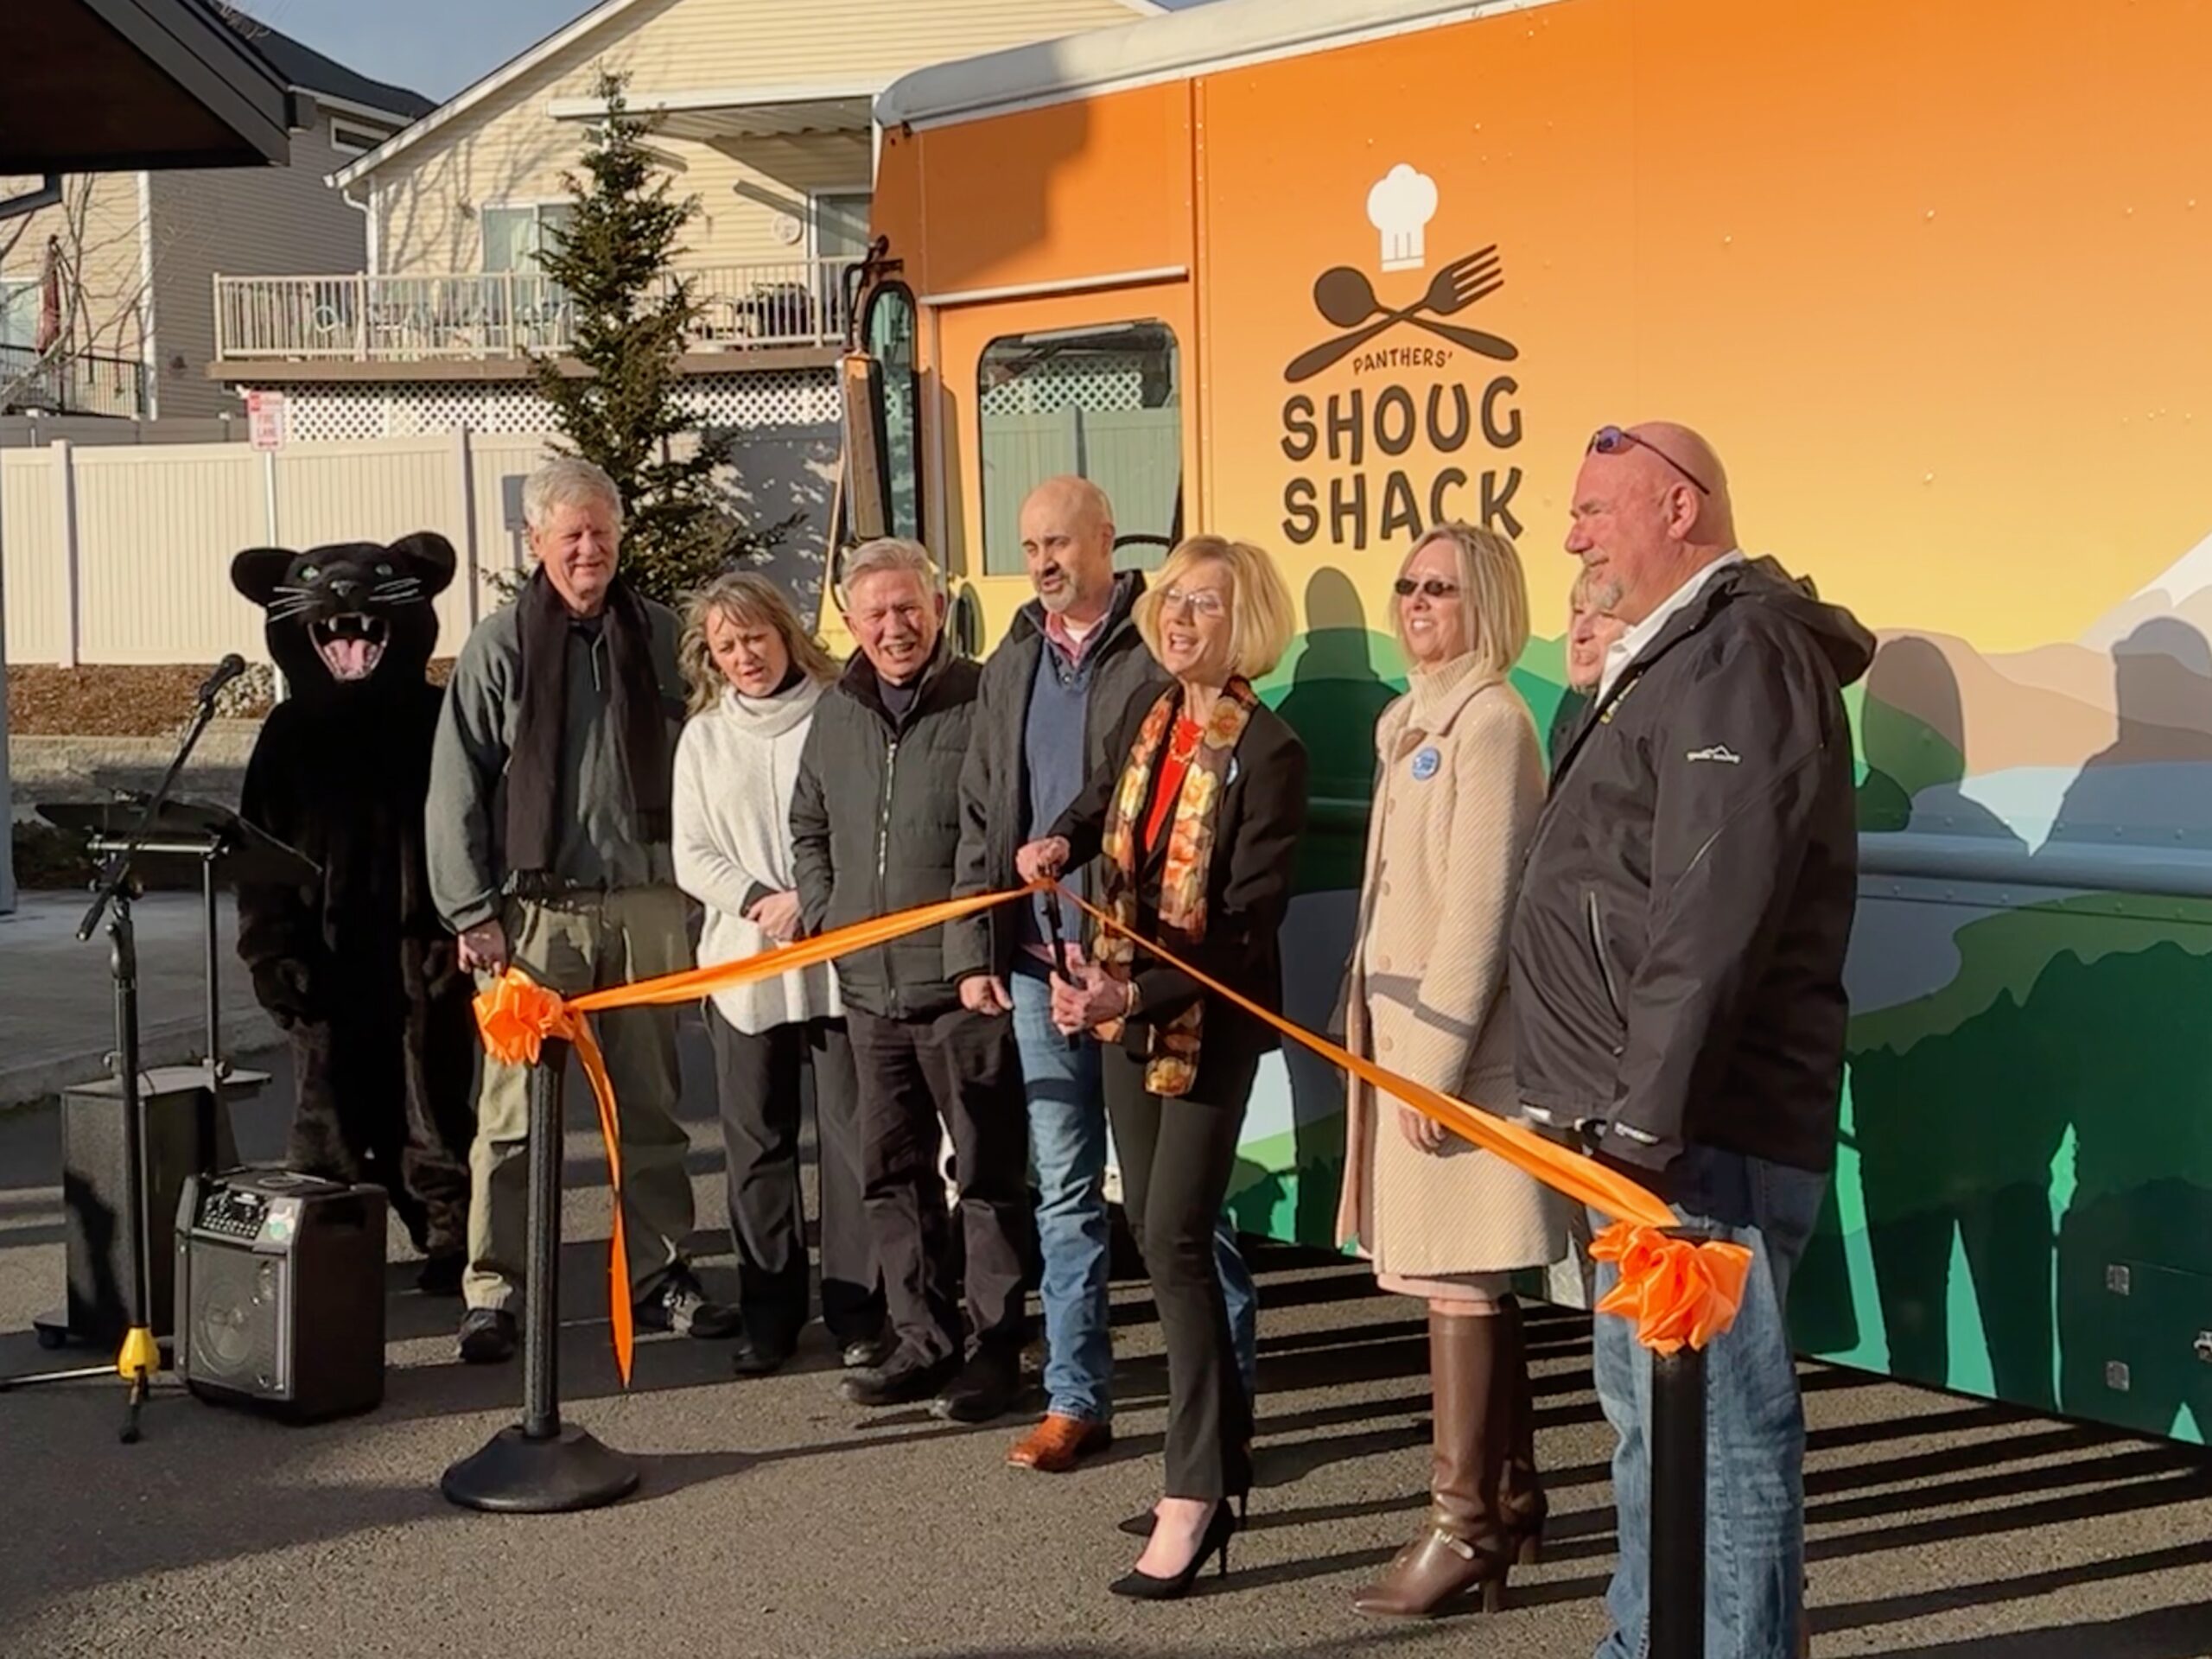 Board members and guests cut ribbon in front of food truck